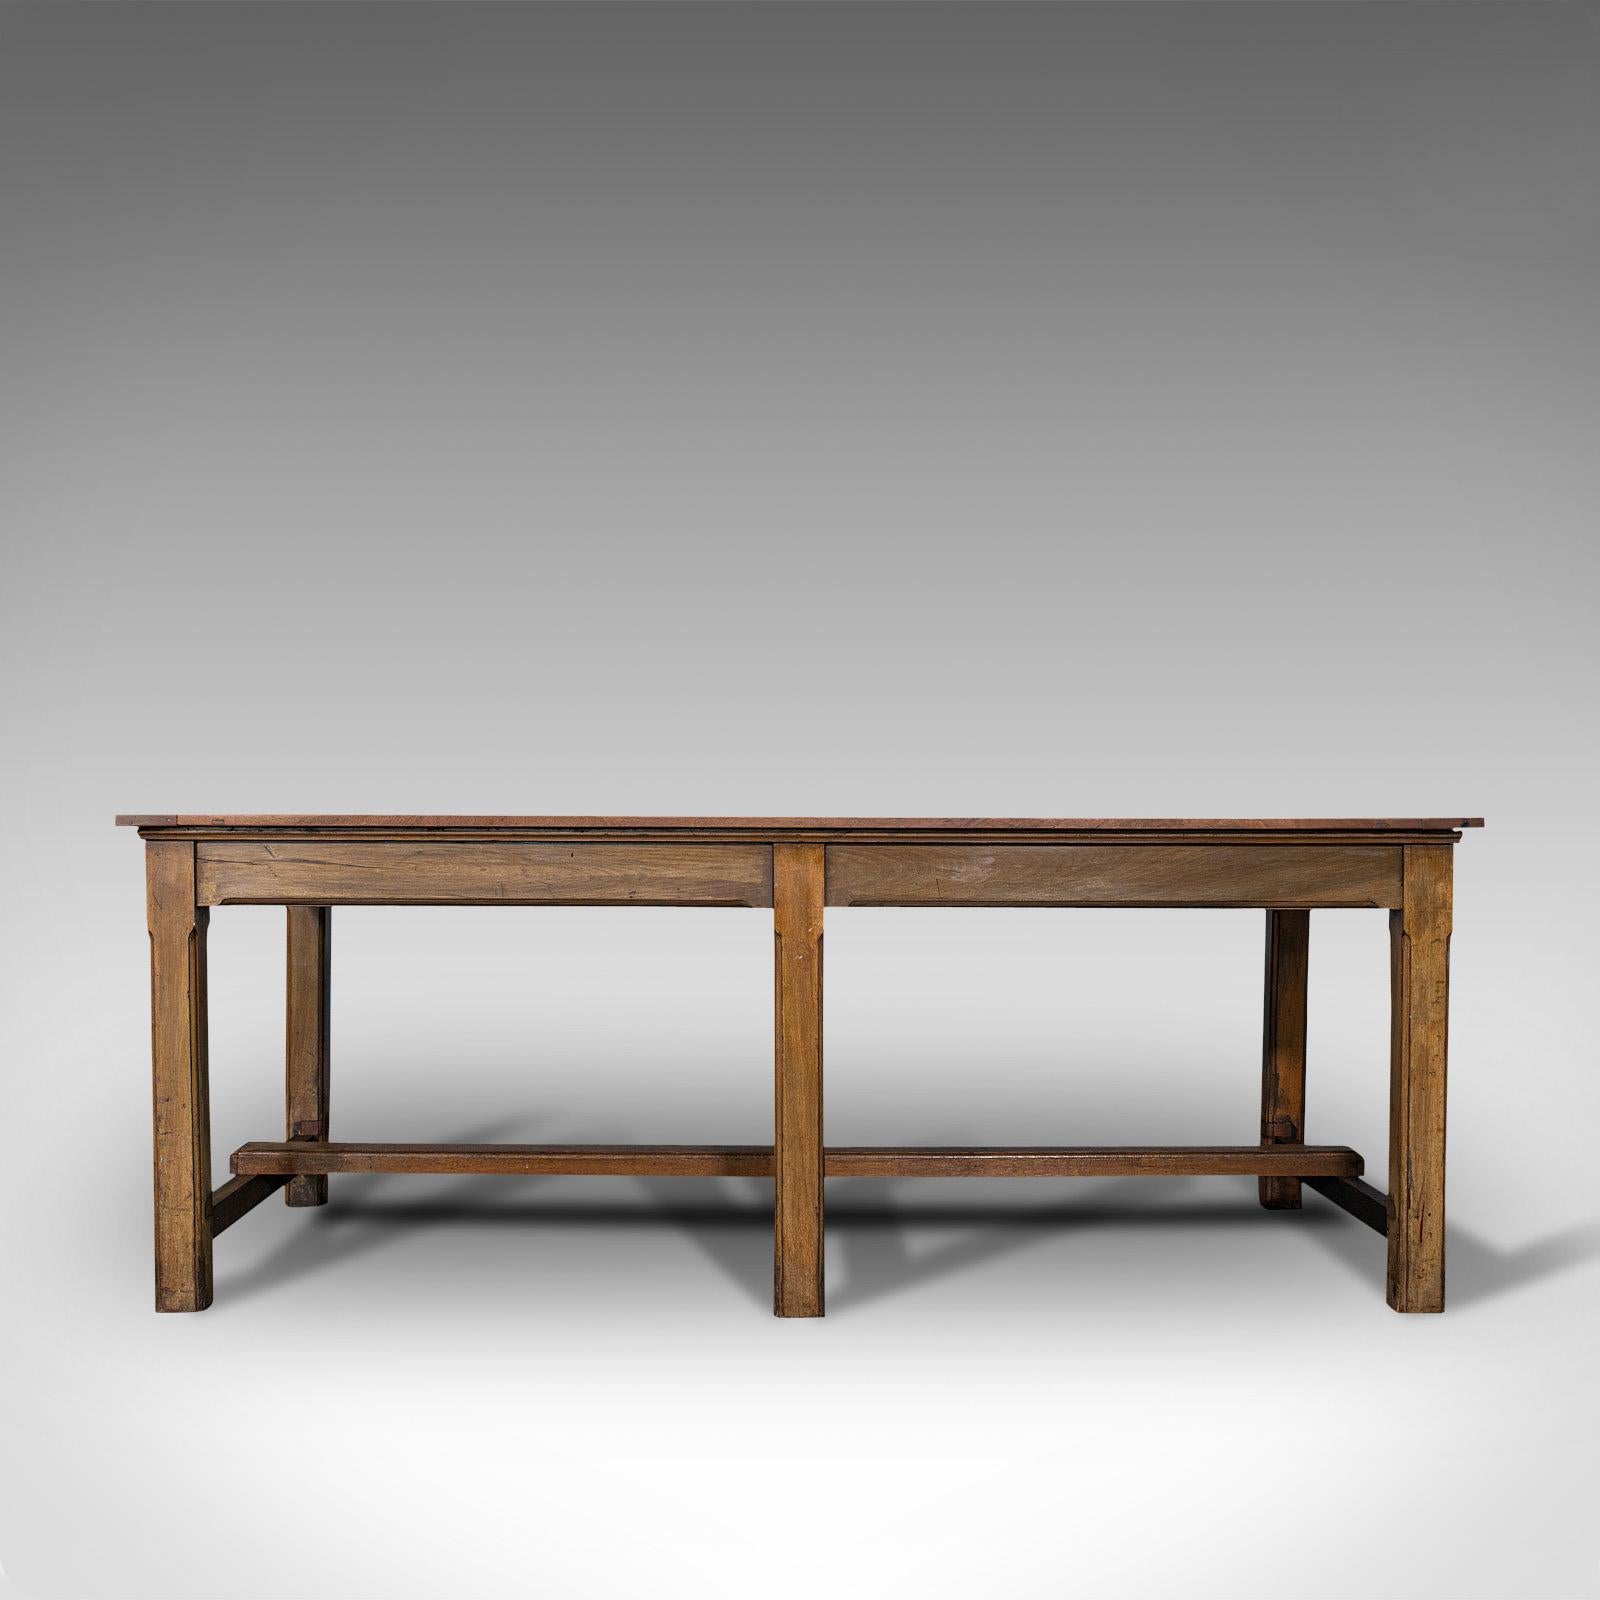 This is a large antique refectory table. An English, solid teak and mahogany table for 8-10 people with industrial taste, dating to the Victorian period and later, circa 1900.

Wonderful proportion and beautiful natural finish
Displaying a